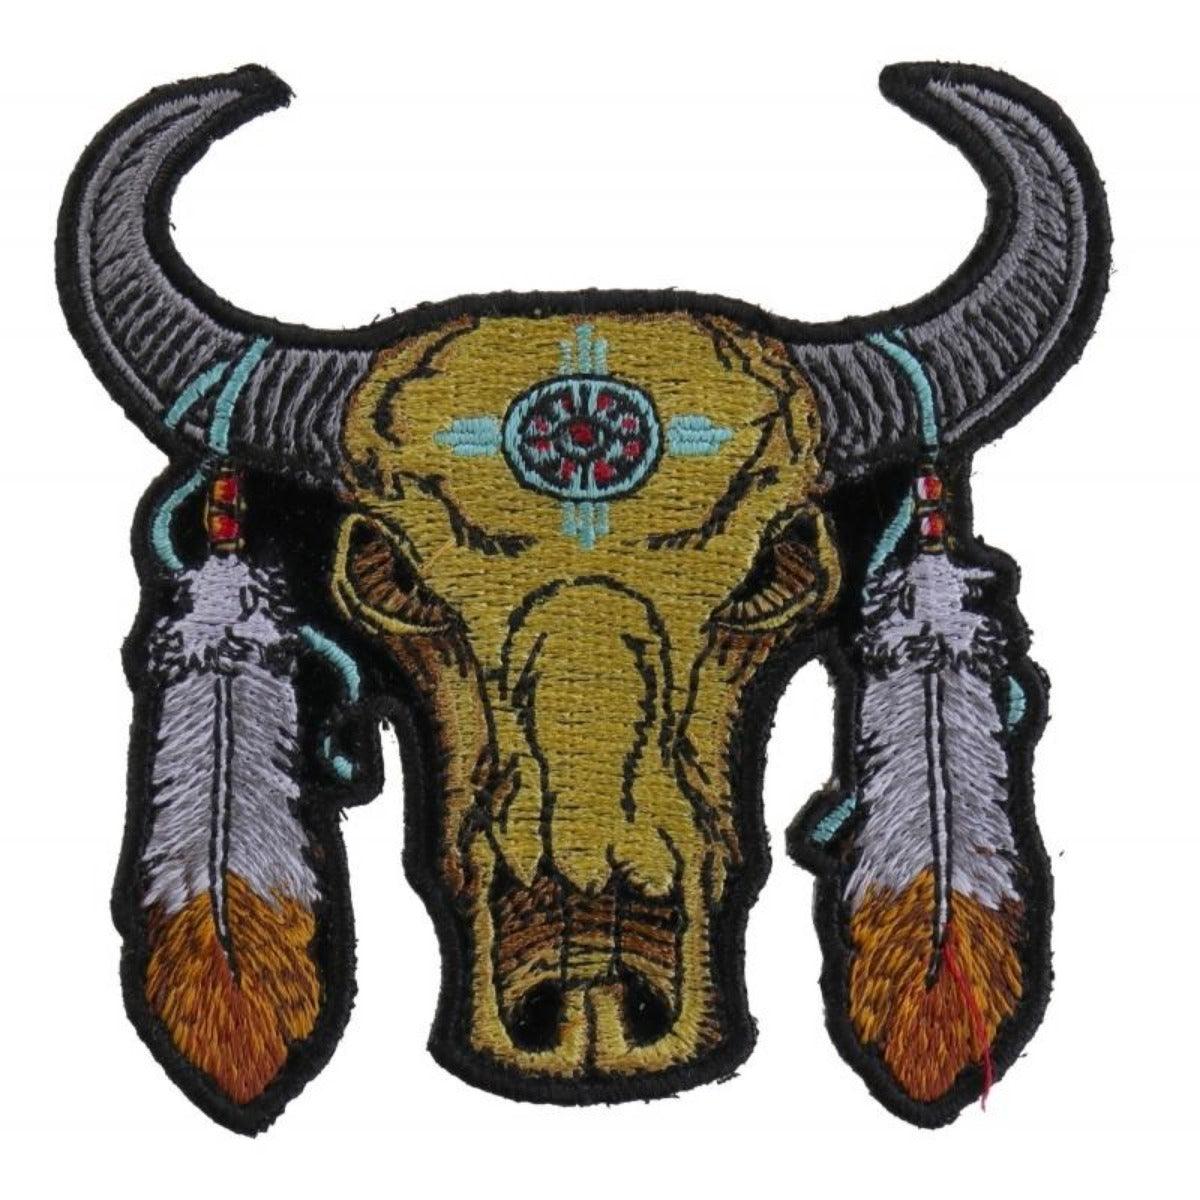 Daniel Smart Buffalo Head Feathers Embroidered Iron On Patch, 3.5 x 3.5 inches - American Legend Rider